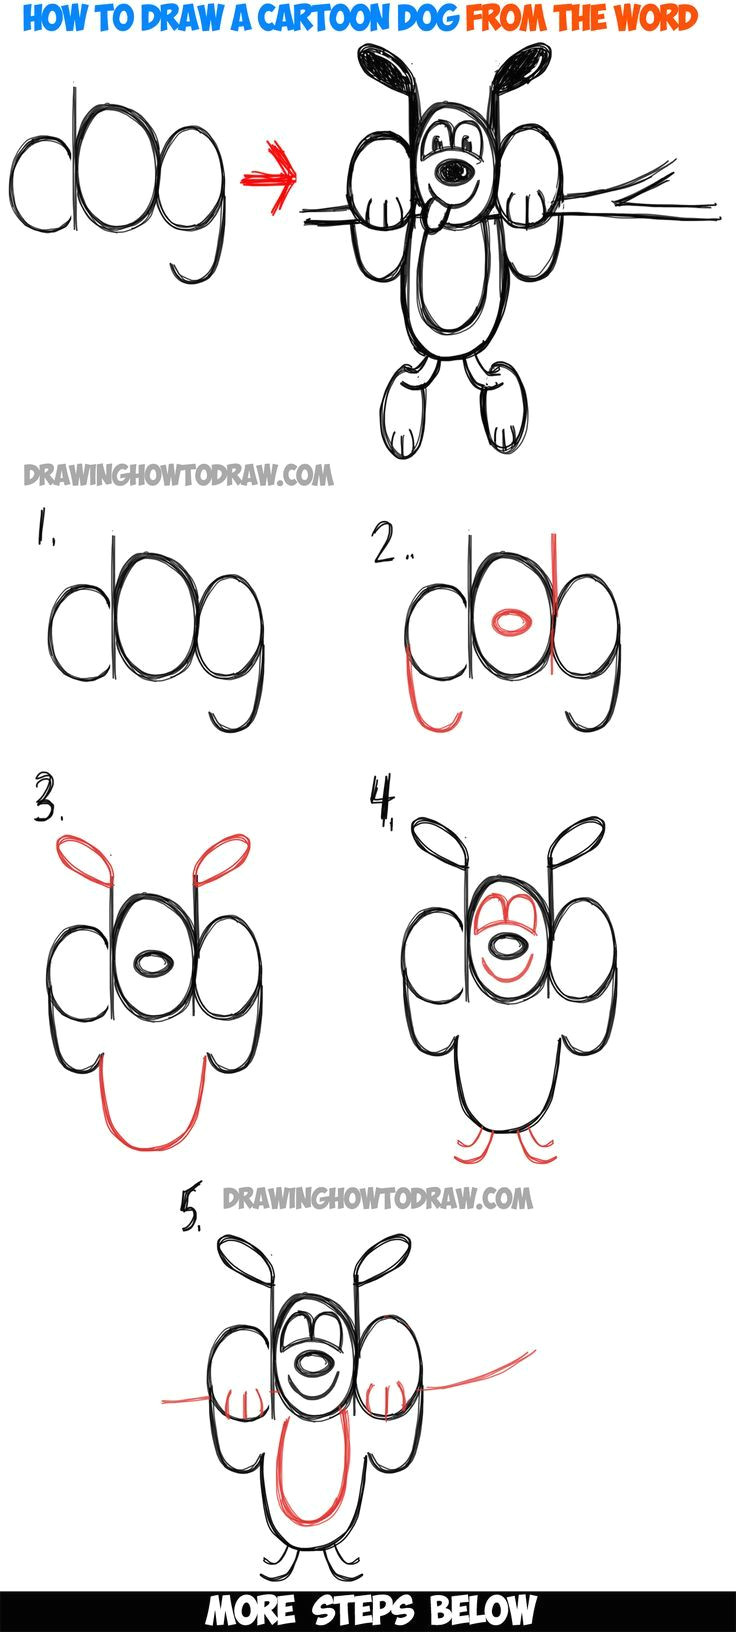 Easy Cartoon Drawing Of A Dog How to Draw A Cartoon Dog Hanging Out From the Word Dog Easy